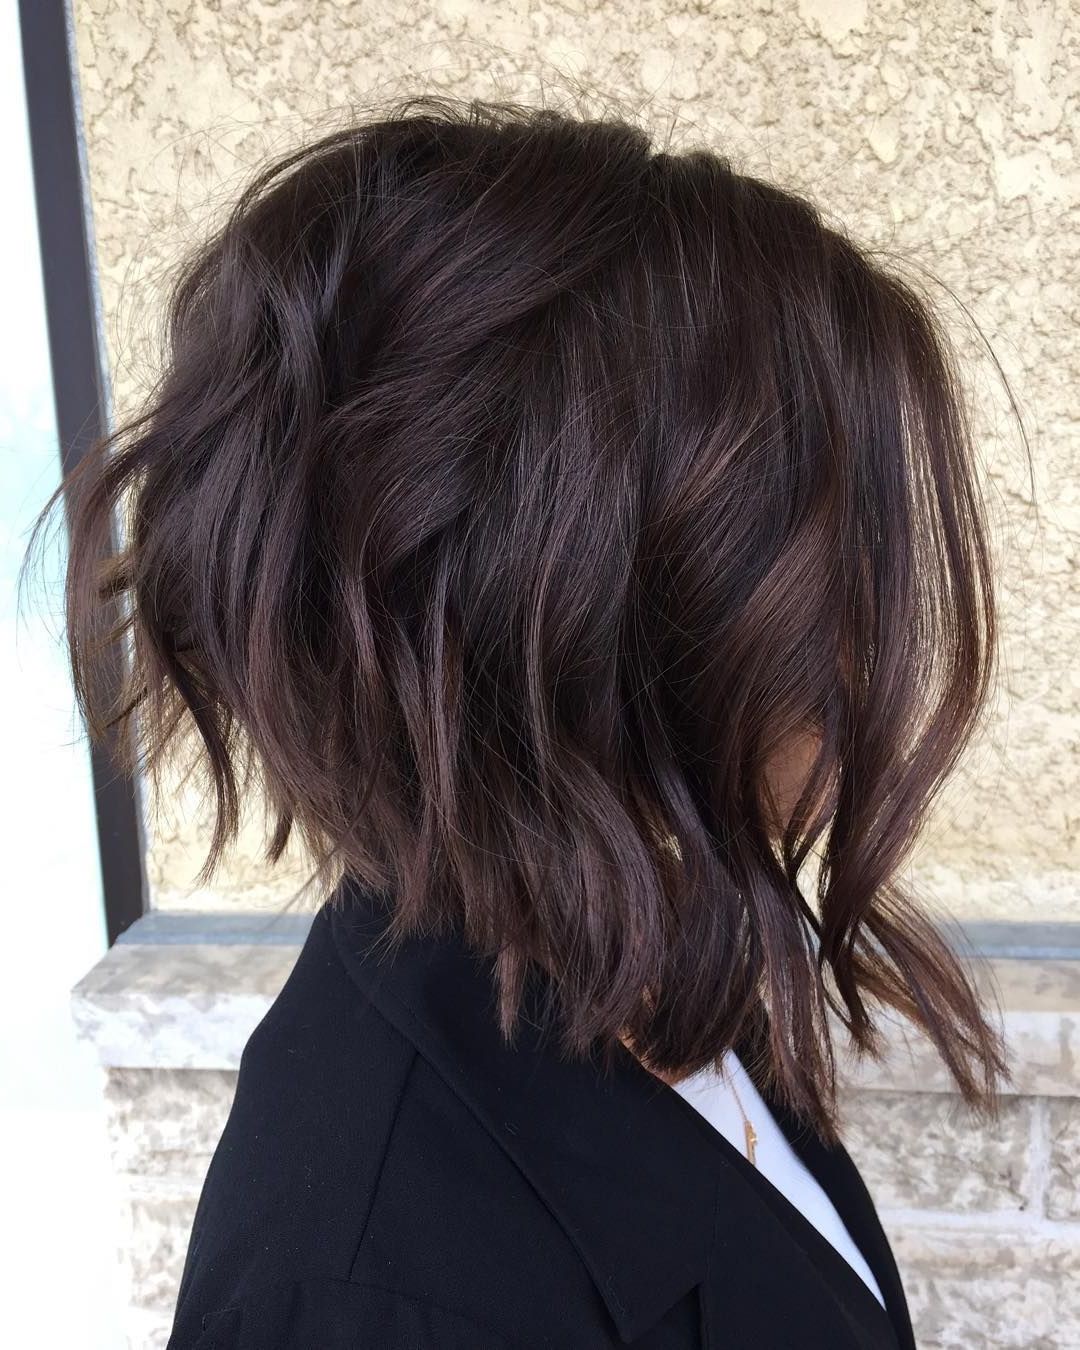 Another Glance At This Textured Cropped Bob Regarding Short Bob Hairstyles With Textured Waves (View 3 of 20)